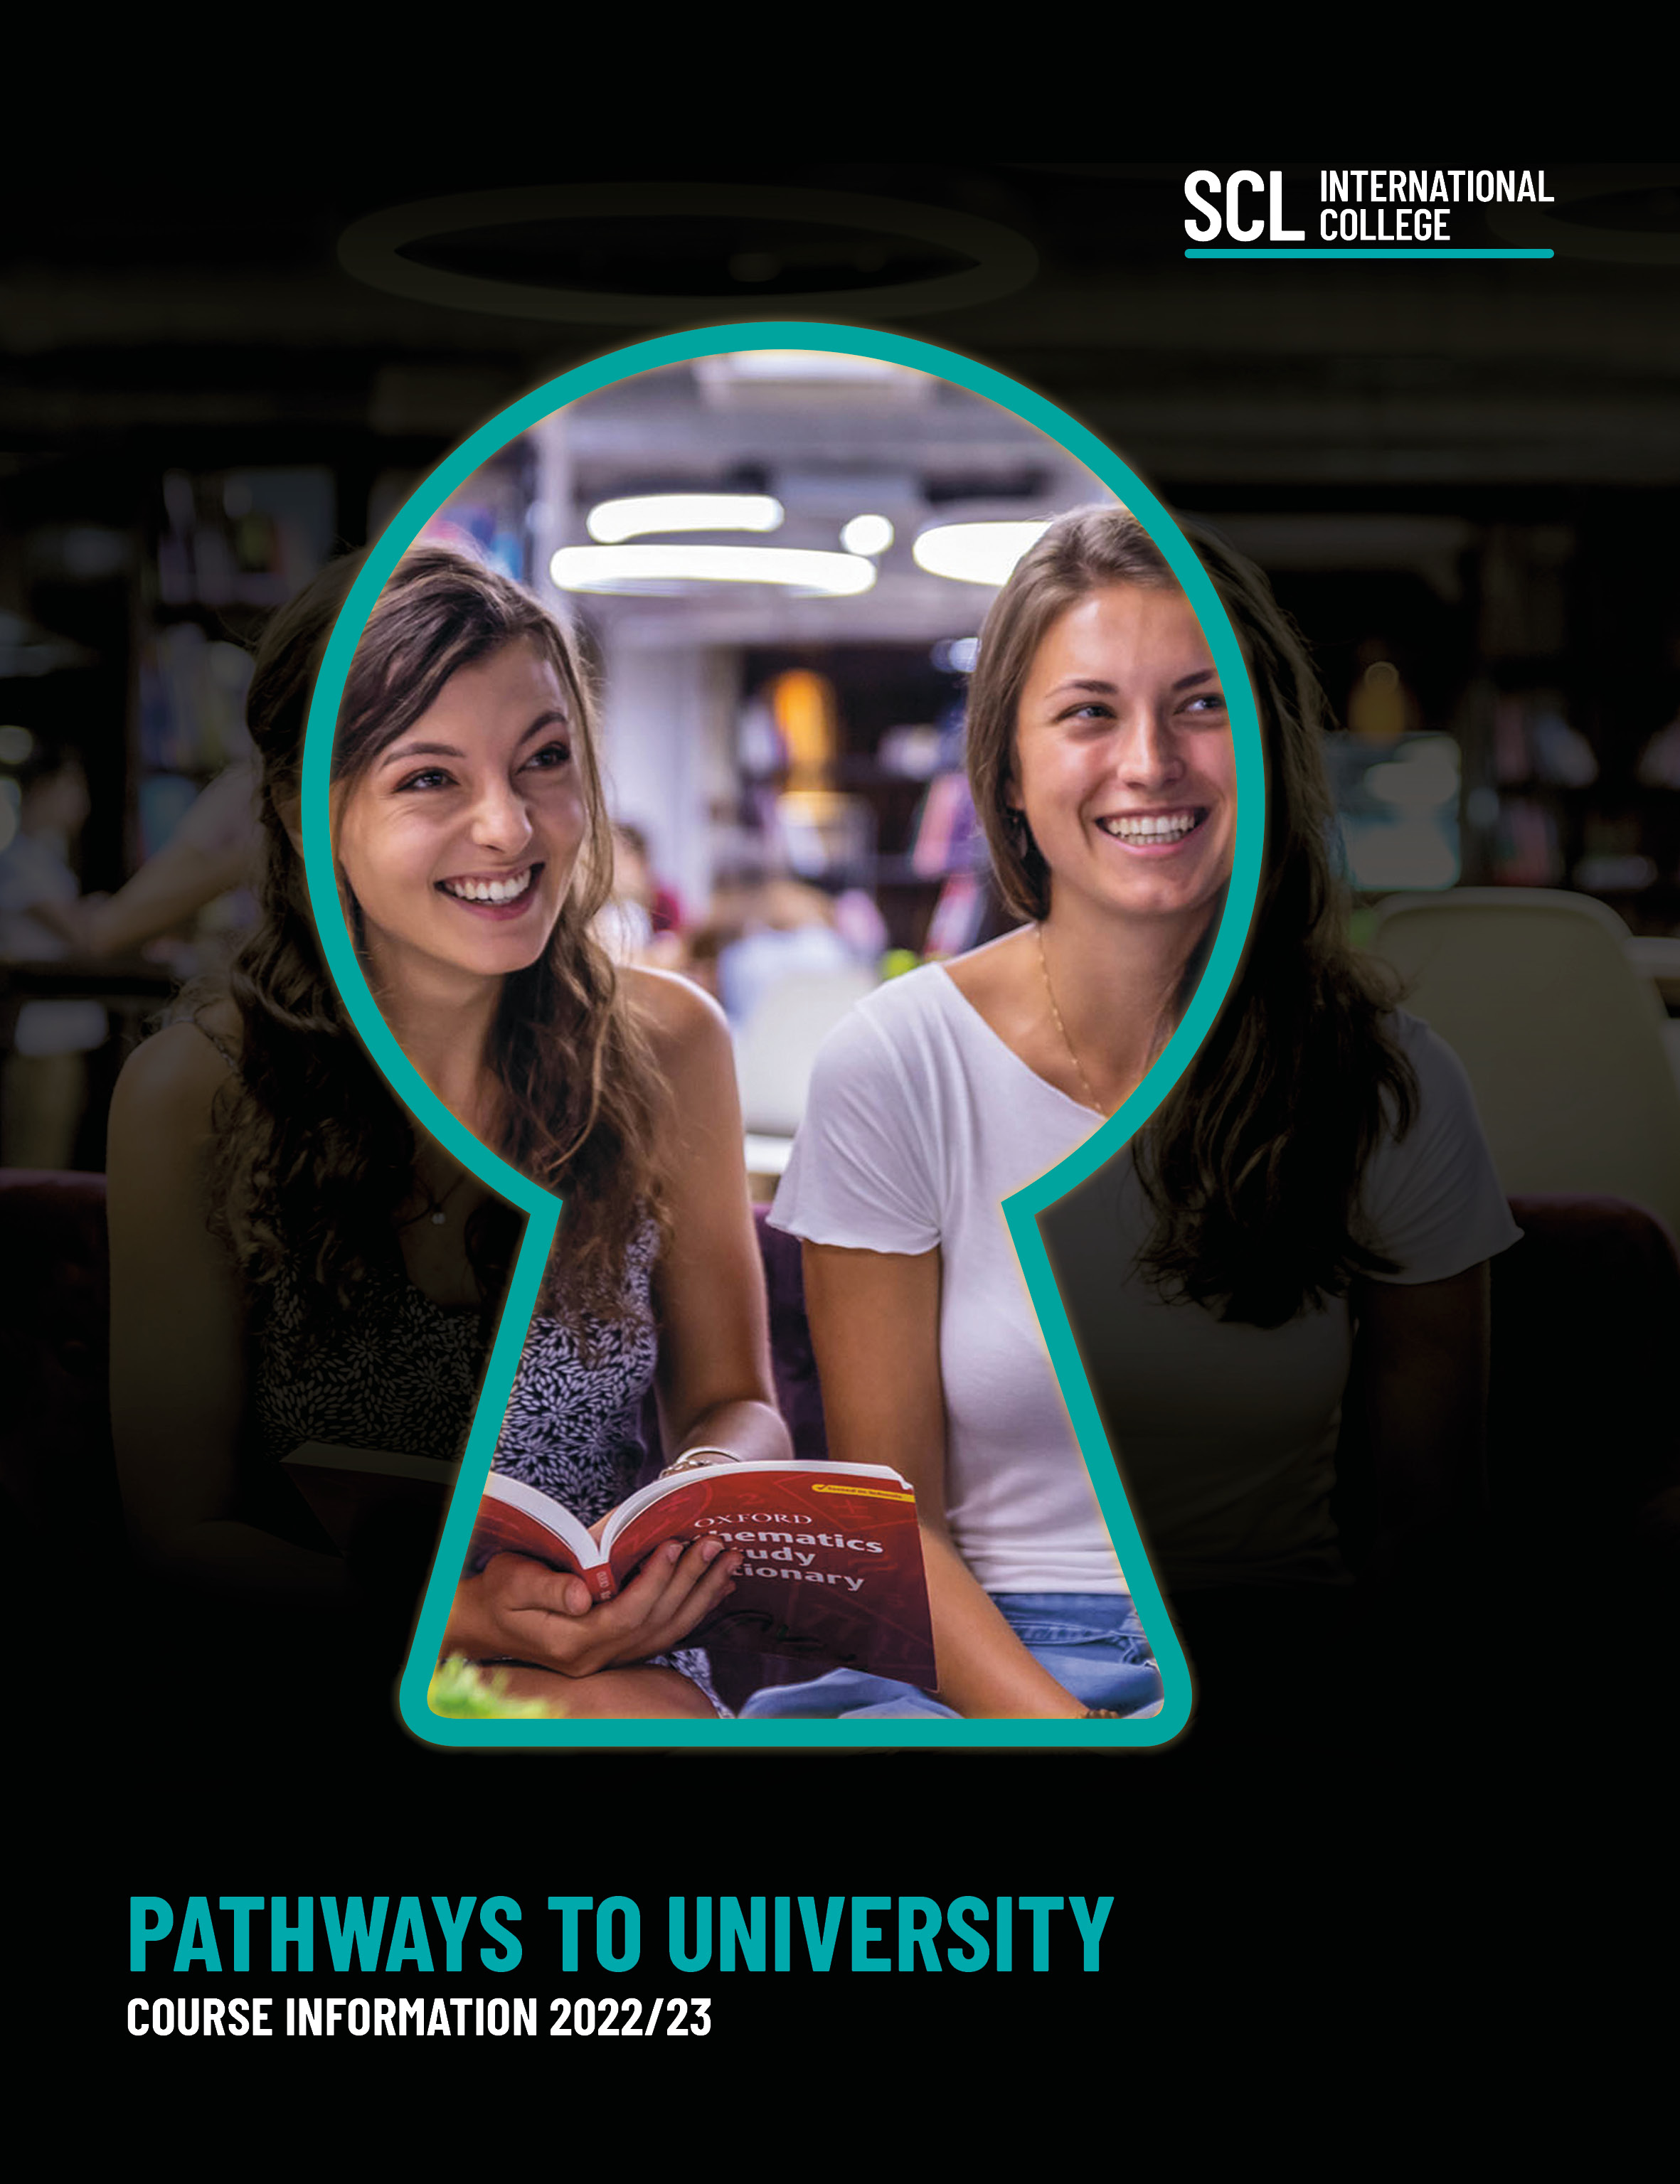 Pathways-To-University-Brochure-2023-Cover-SCL-International-College